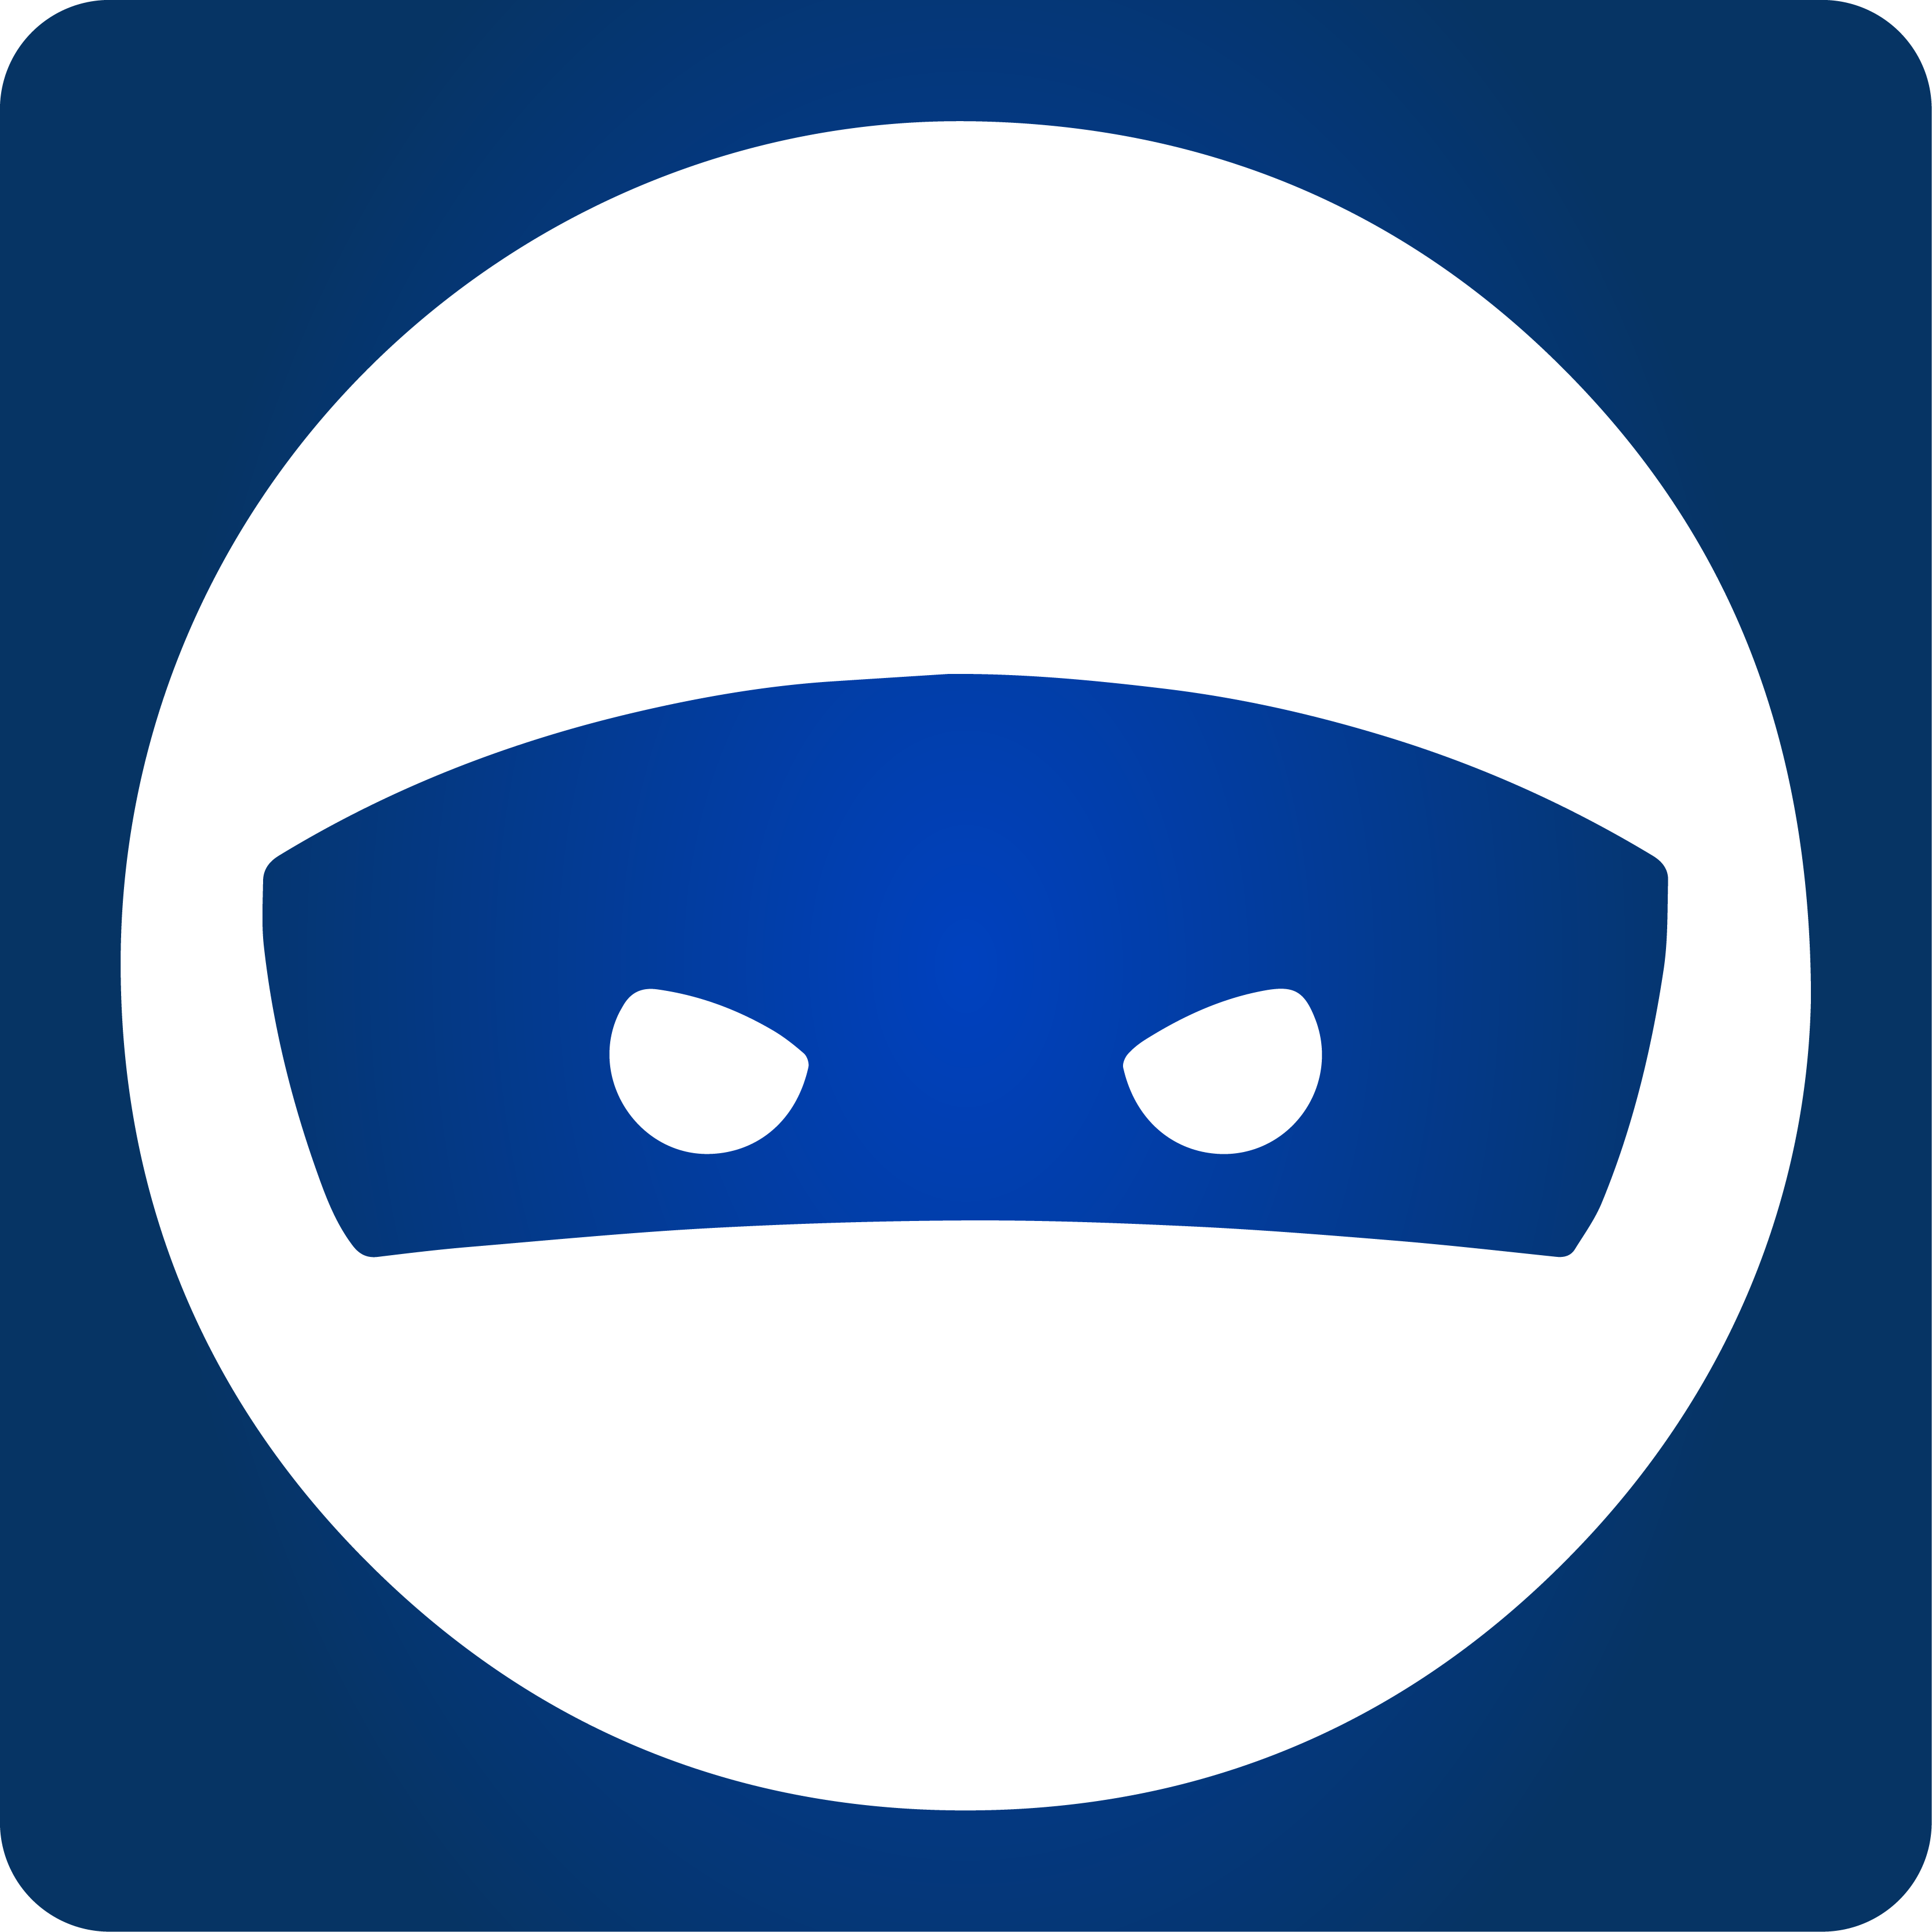 Ninja icon - shows a masked face with only eyes showing.